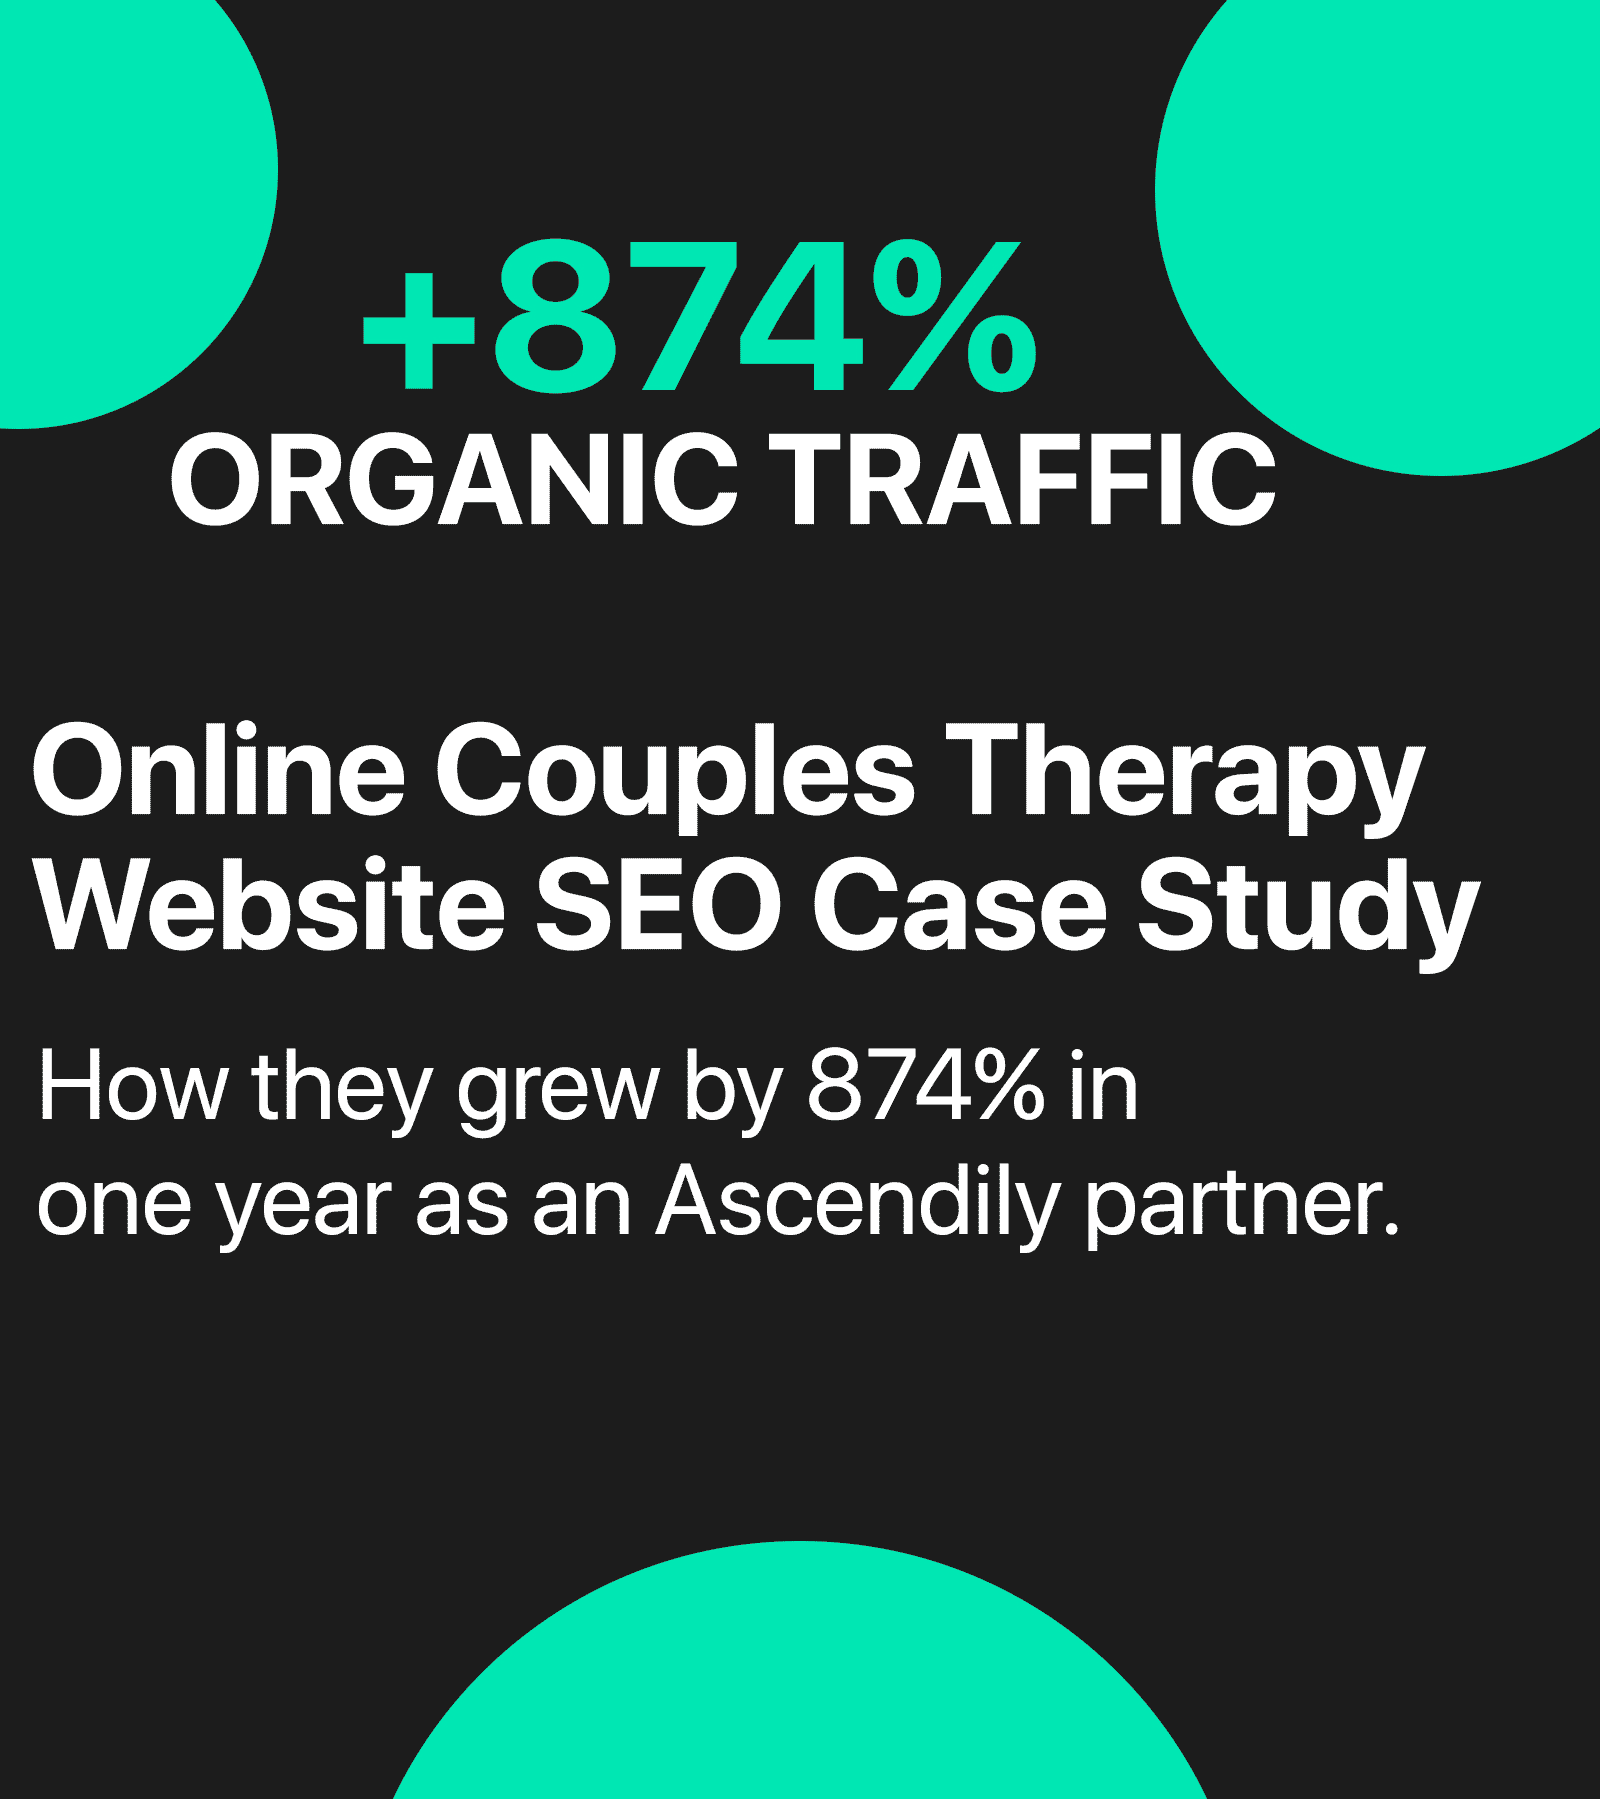 Online couples therapy seo case study featured imag